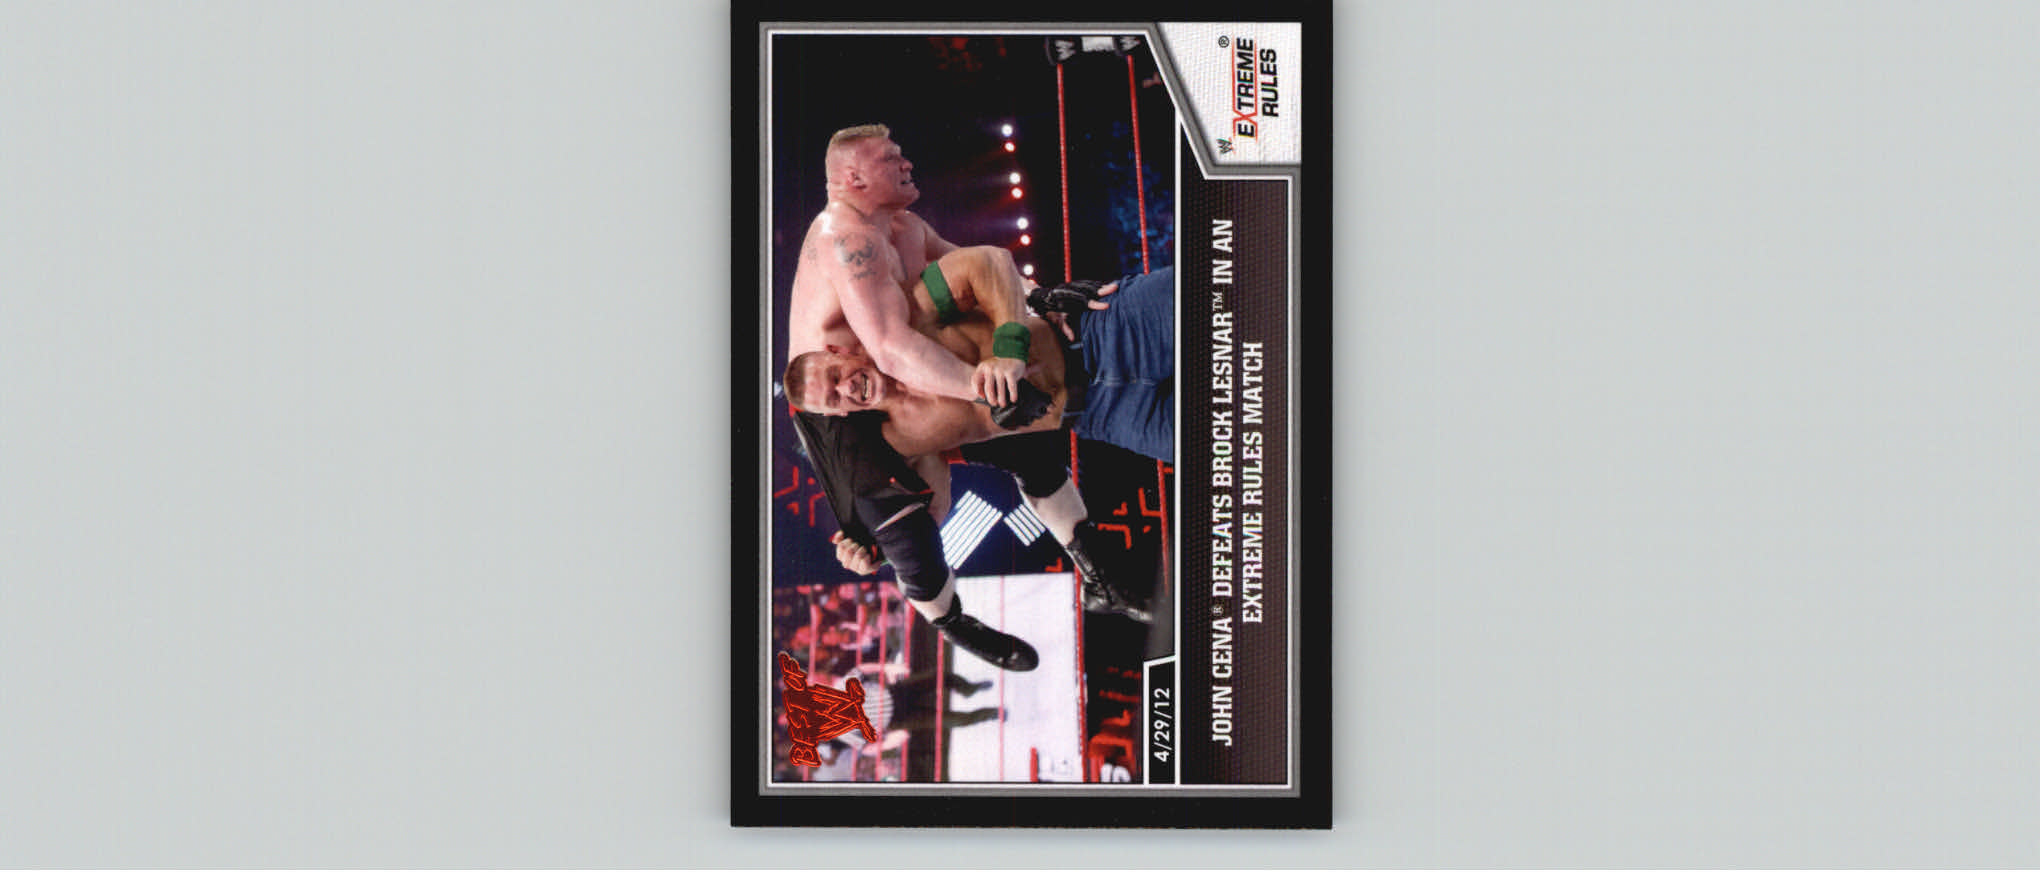 2013 Topps Best of WWE #9 John Cena Defeats Brock Lesnar in an Extreme Rules Match